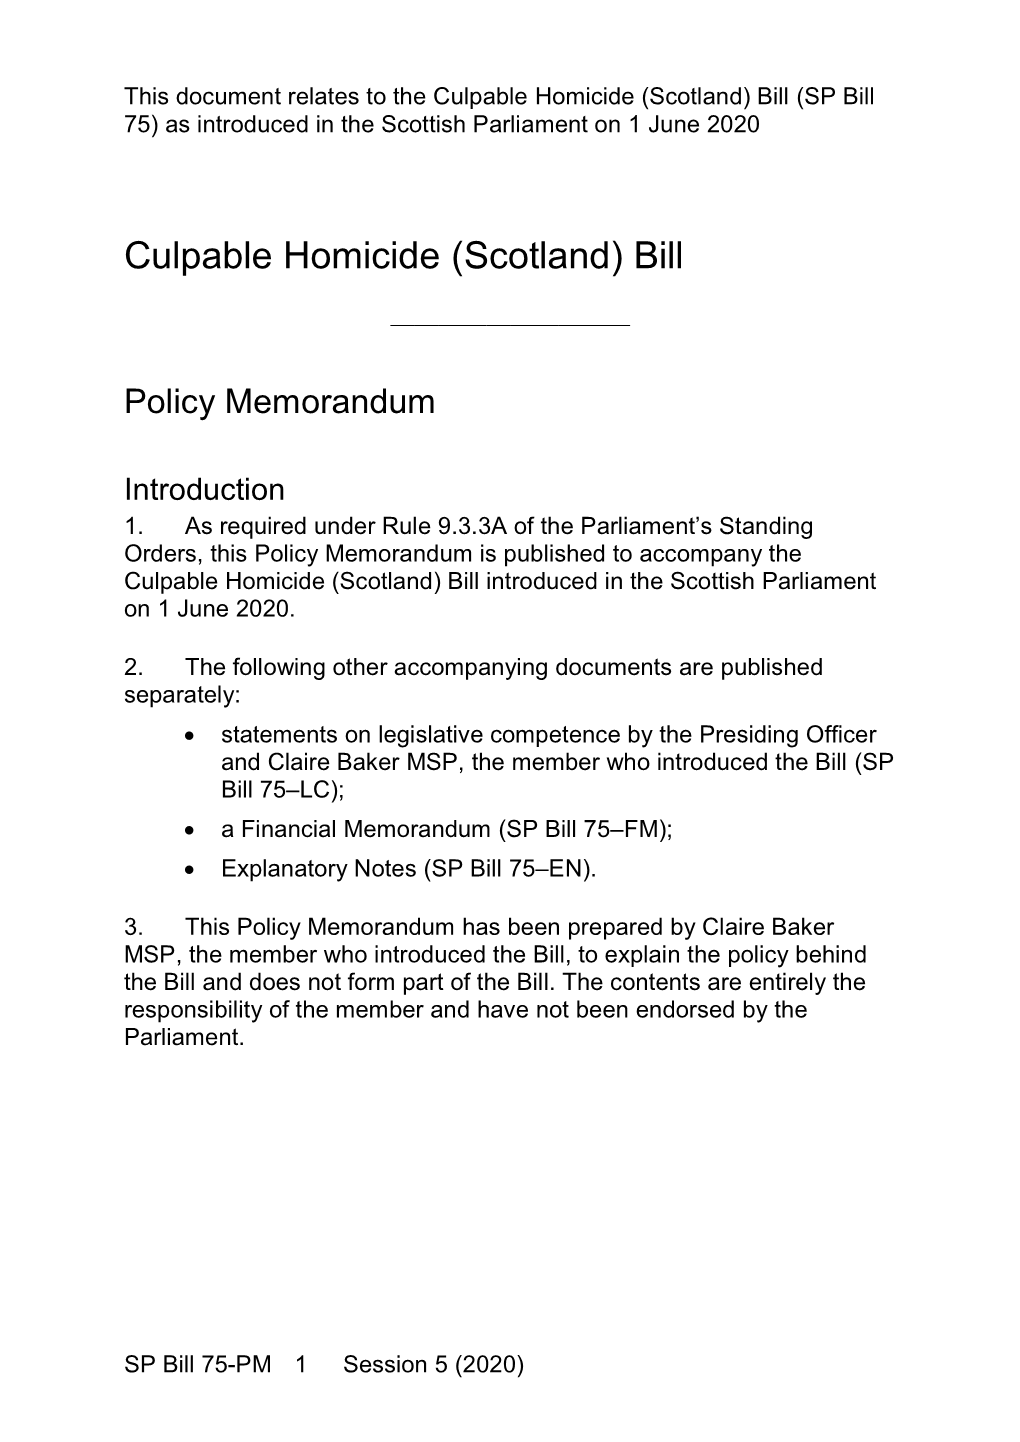 Culpable Homicide (Scotland) Bill (SP Bill 75) As Introduced in the Scottish Parliament on 1 June 2020